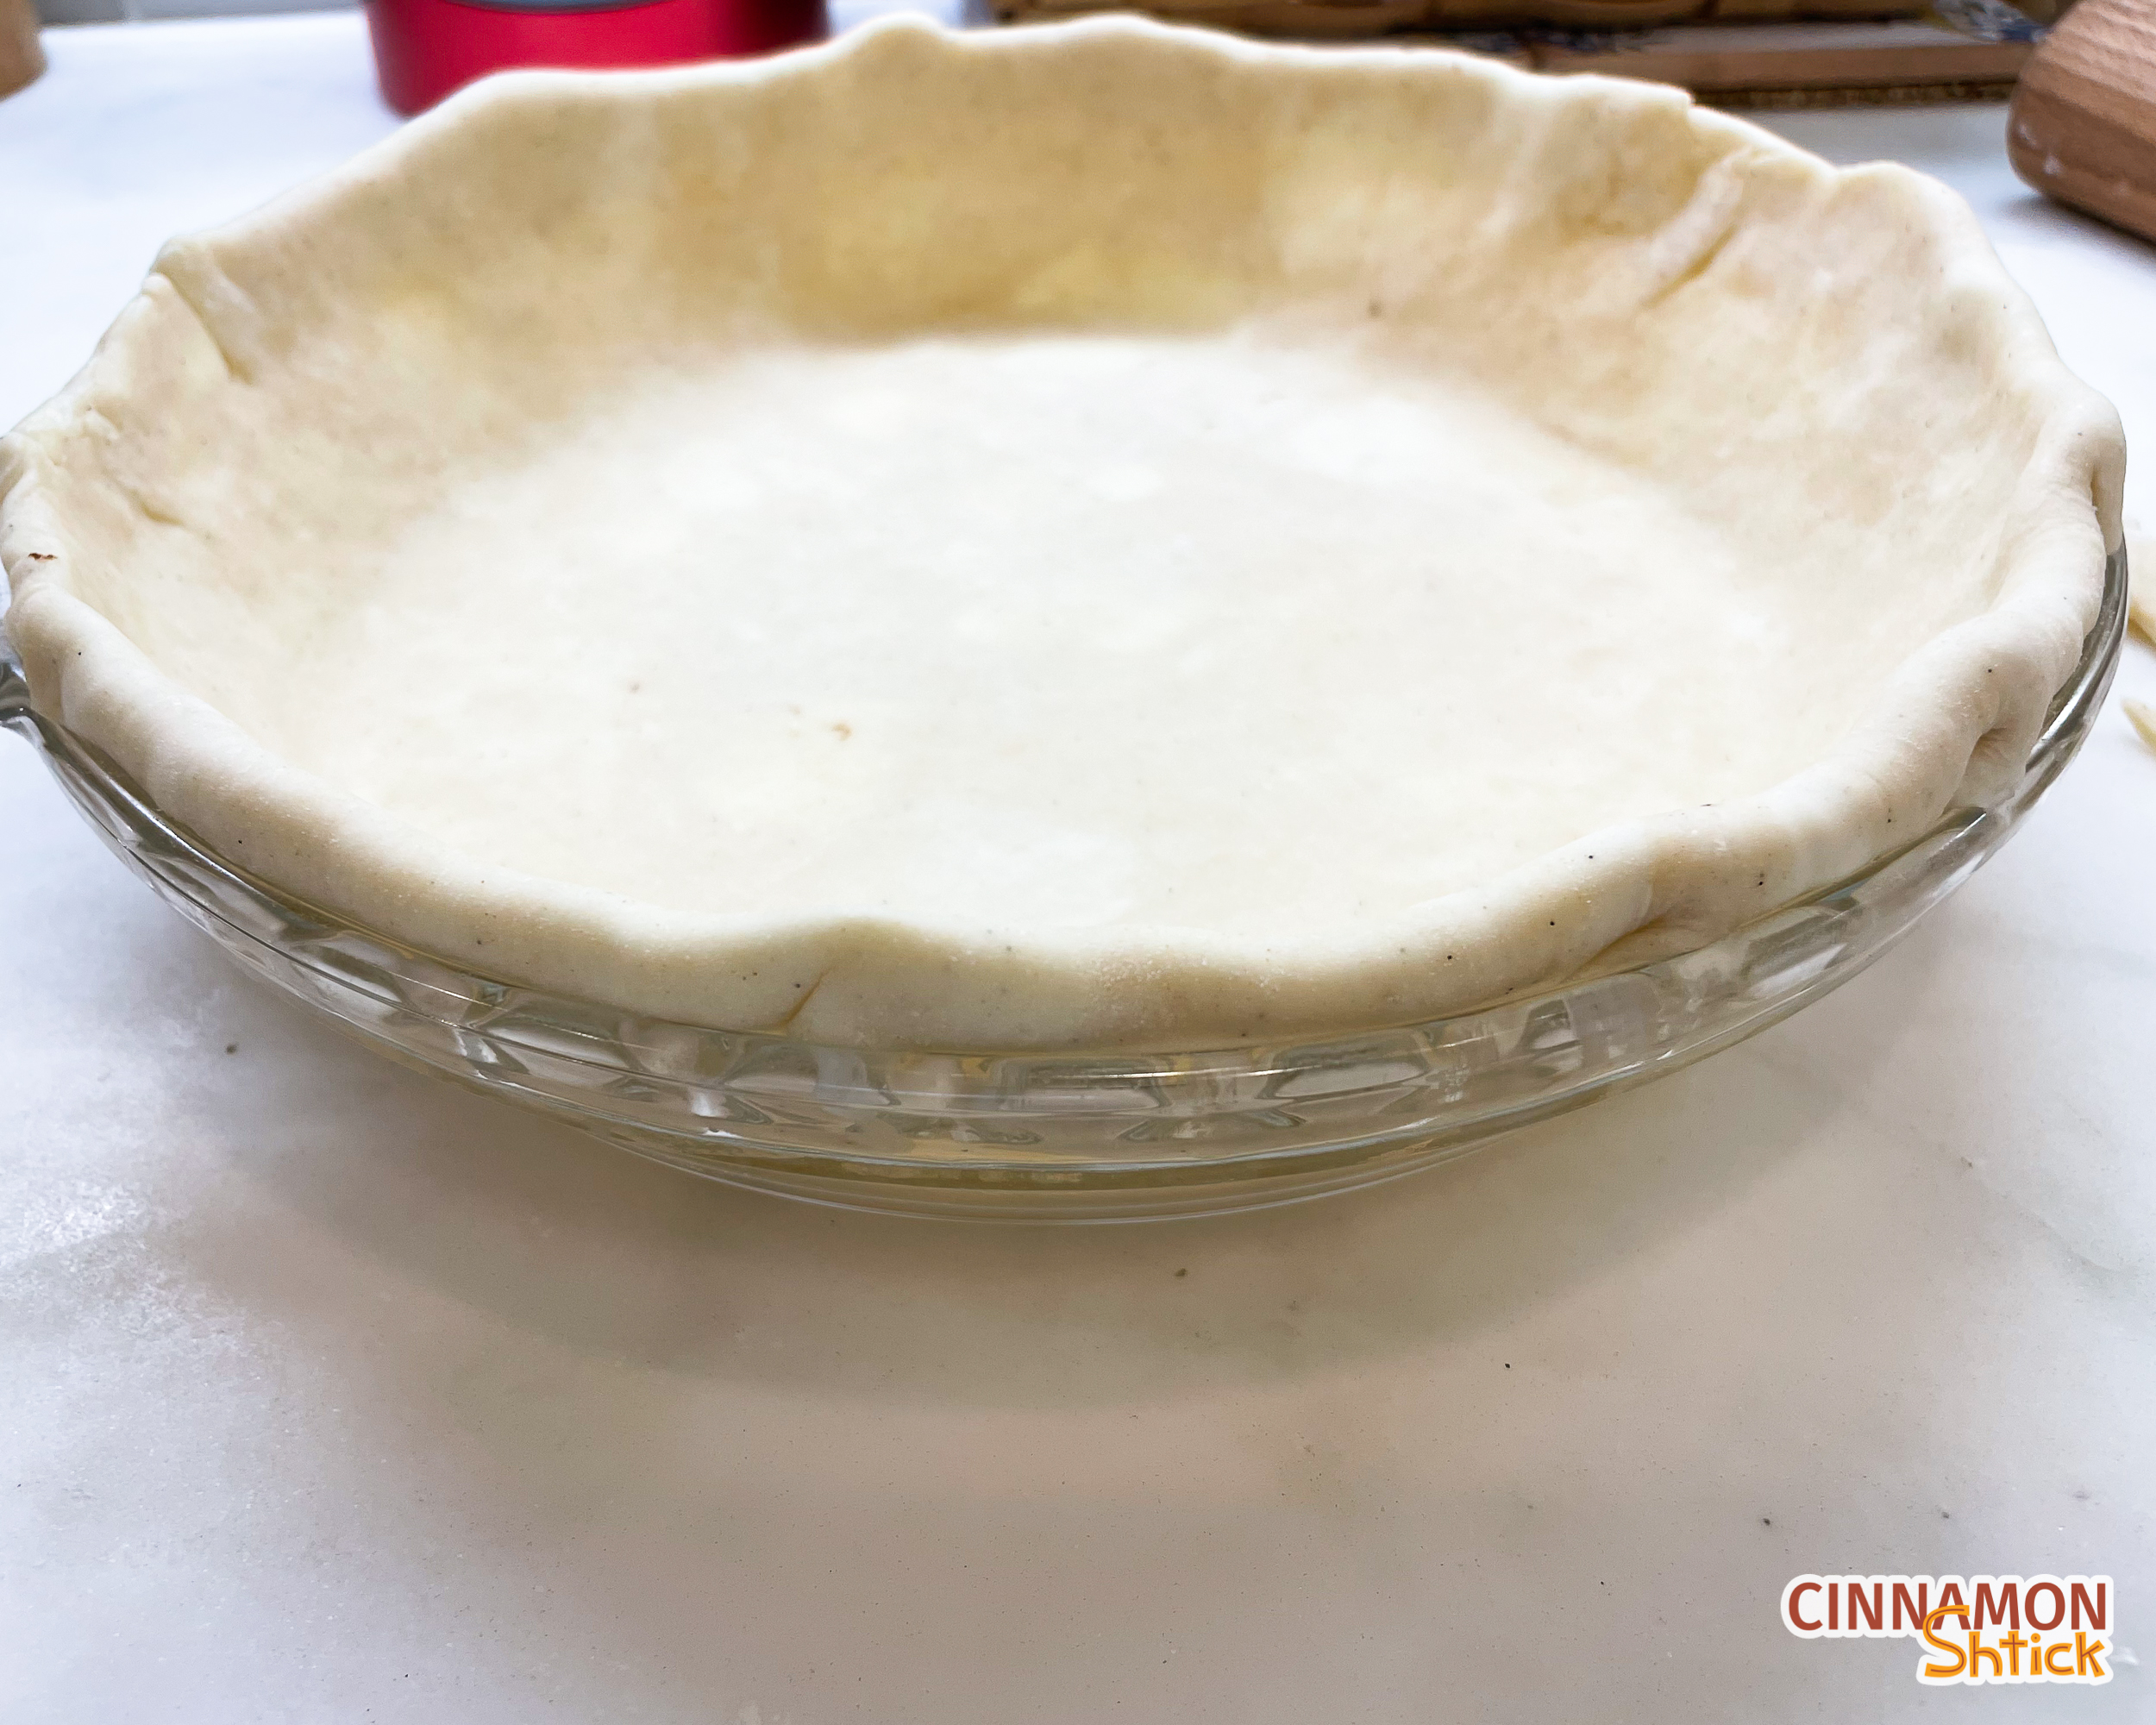 side view of pie dough in pie plate showing that the overhand was tucked into the pie dish